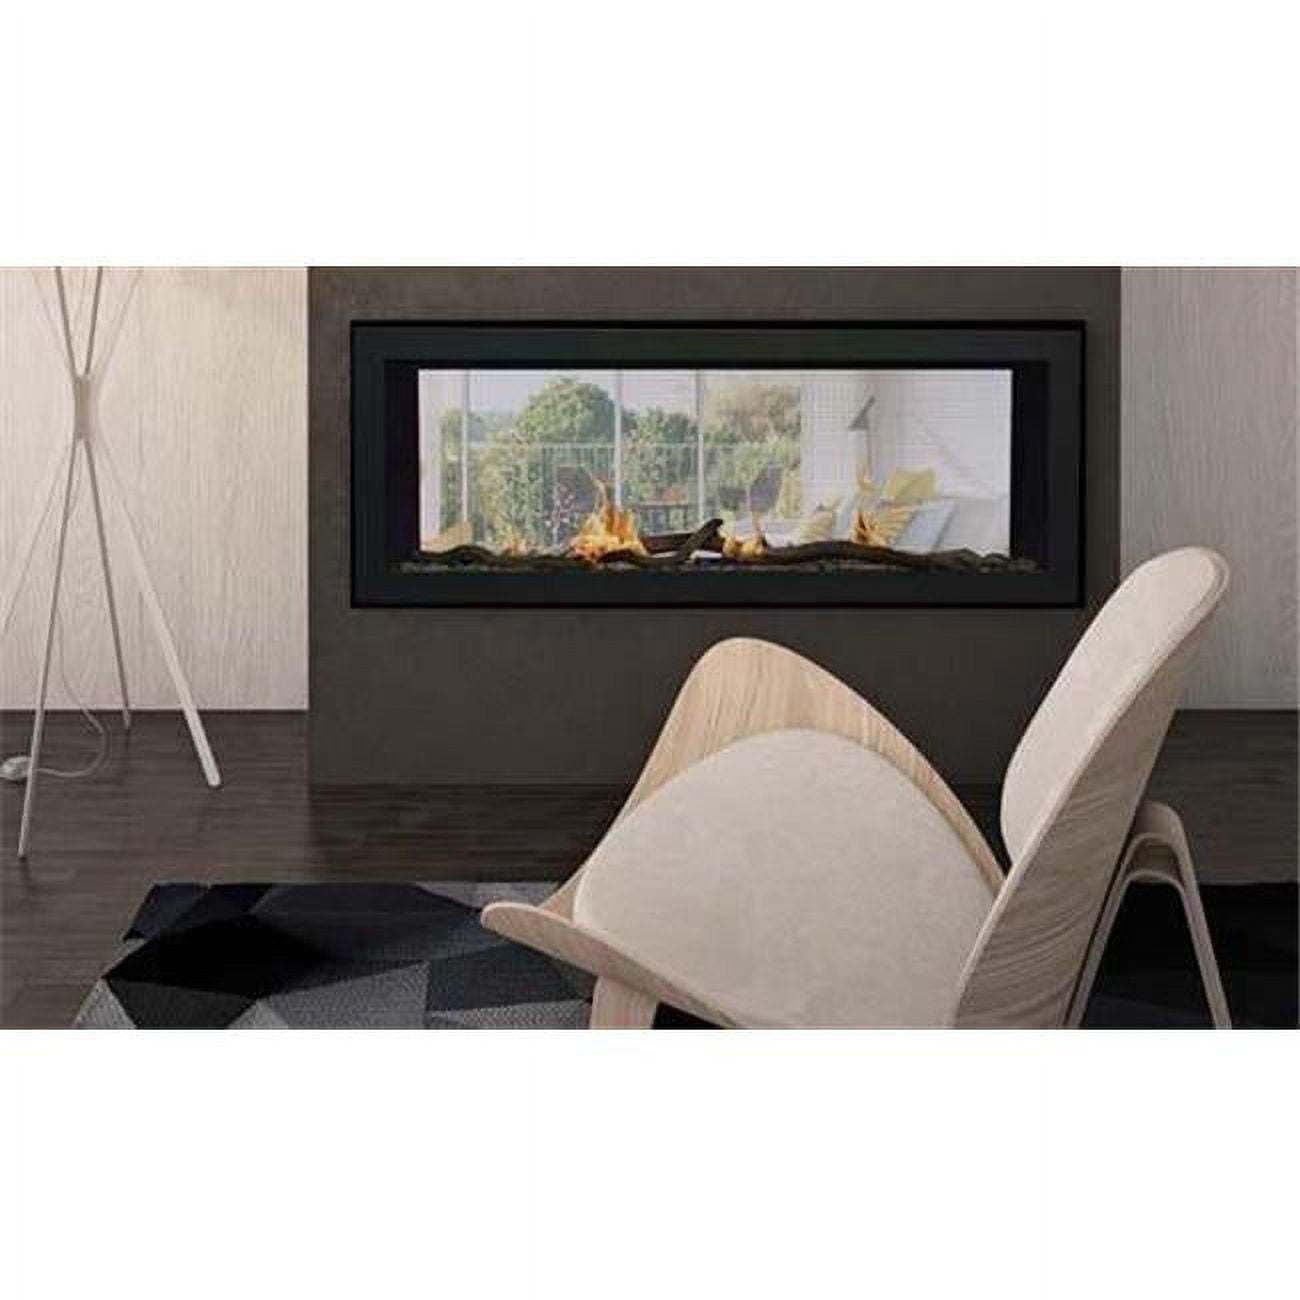 Emerson-48-deluxe-ng 48 In. See-thru Emerson Deluxe Linear Direct Vent Gas Fireplace - Natural Gas